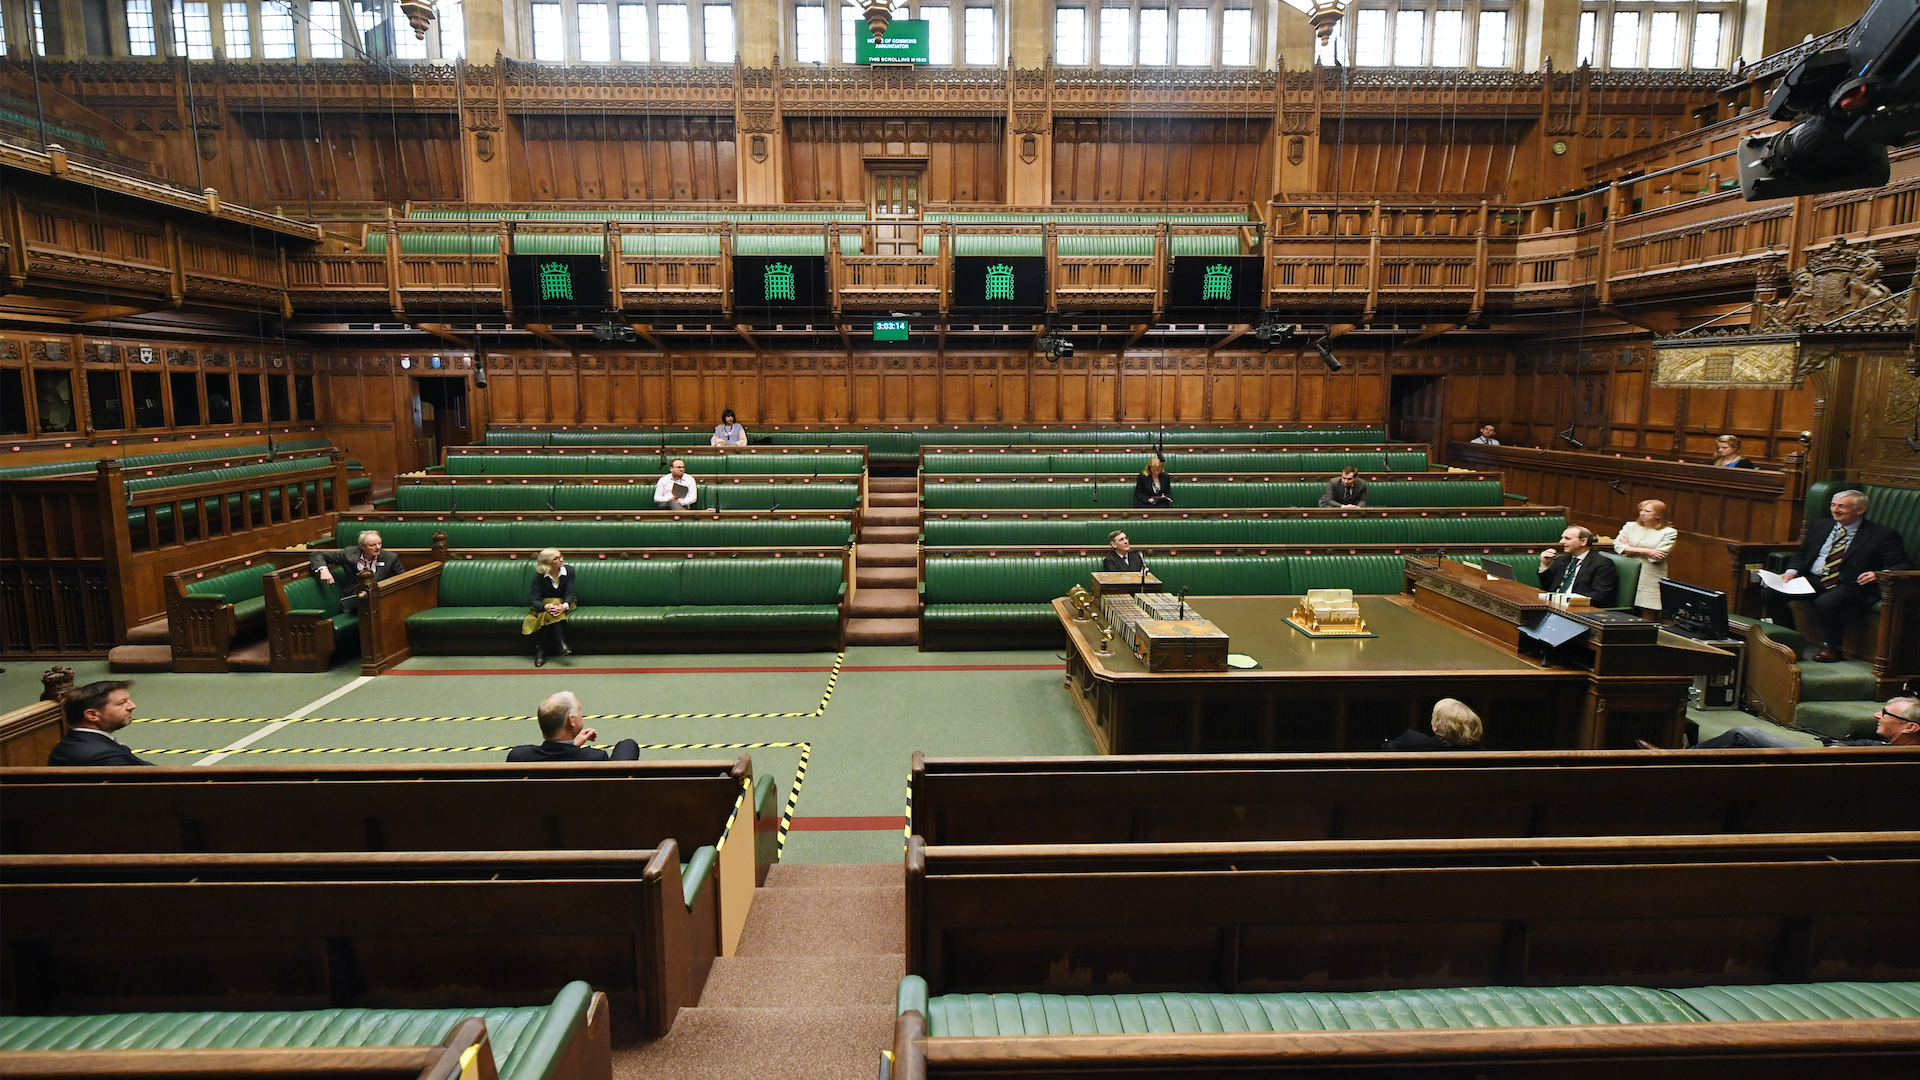 Empty benches in the house of commons during the coronavirus pandemic